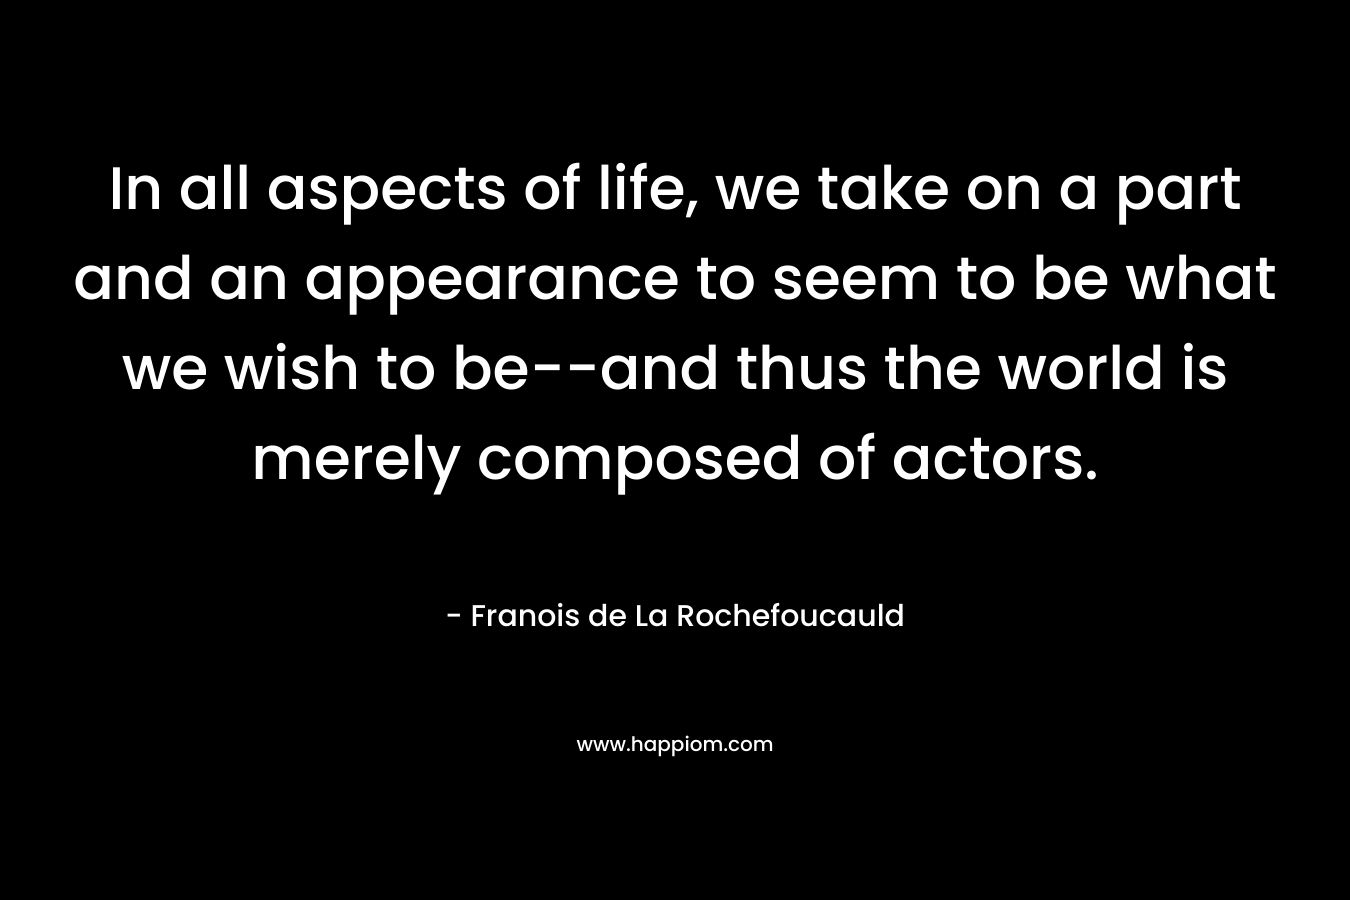 In all aspects of life, we take on a part and an appearance to seem to be what we wish to be–and thus the world is merely composed of actors. – Franois de La Rochefoucauld